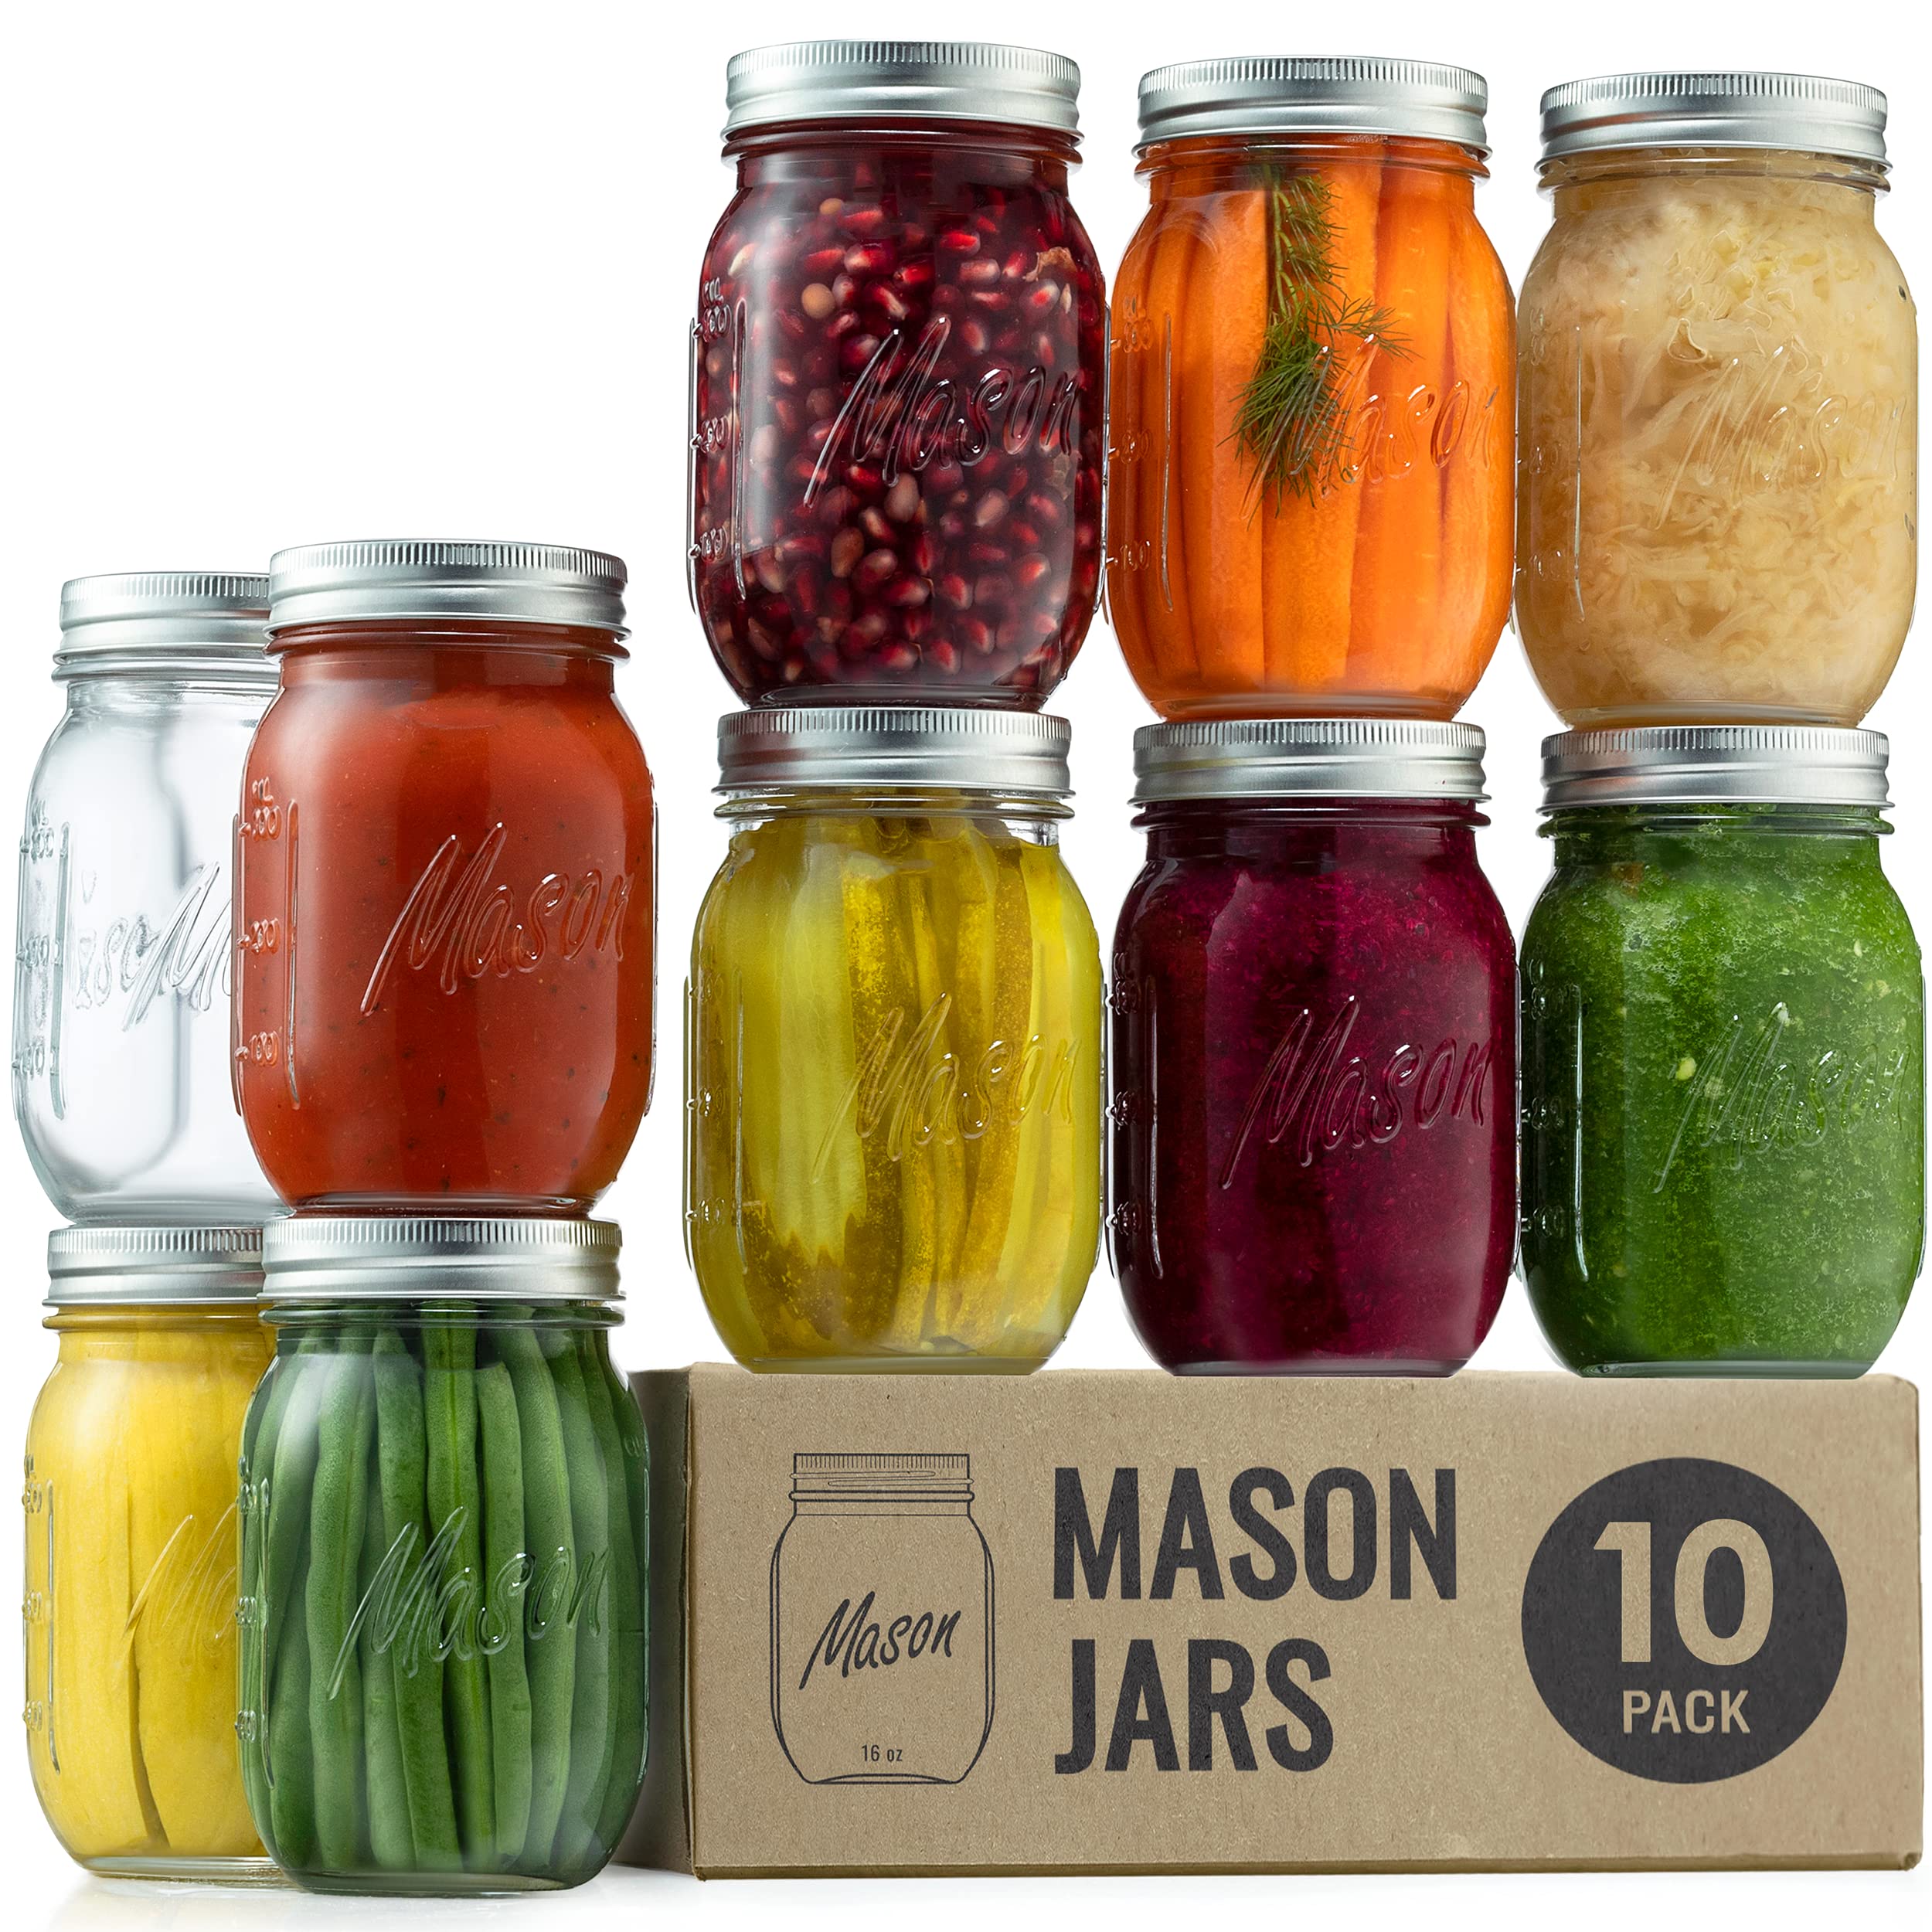 Paksh Novelty Mason Jars 16 oz - 10-Pack Regular Mouth glass Jars with Lid & Seal Bands - Airtight container for Pickling, canni